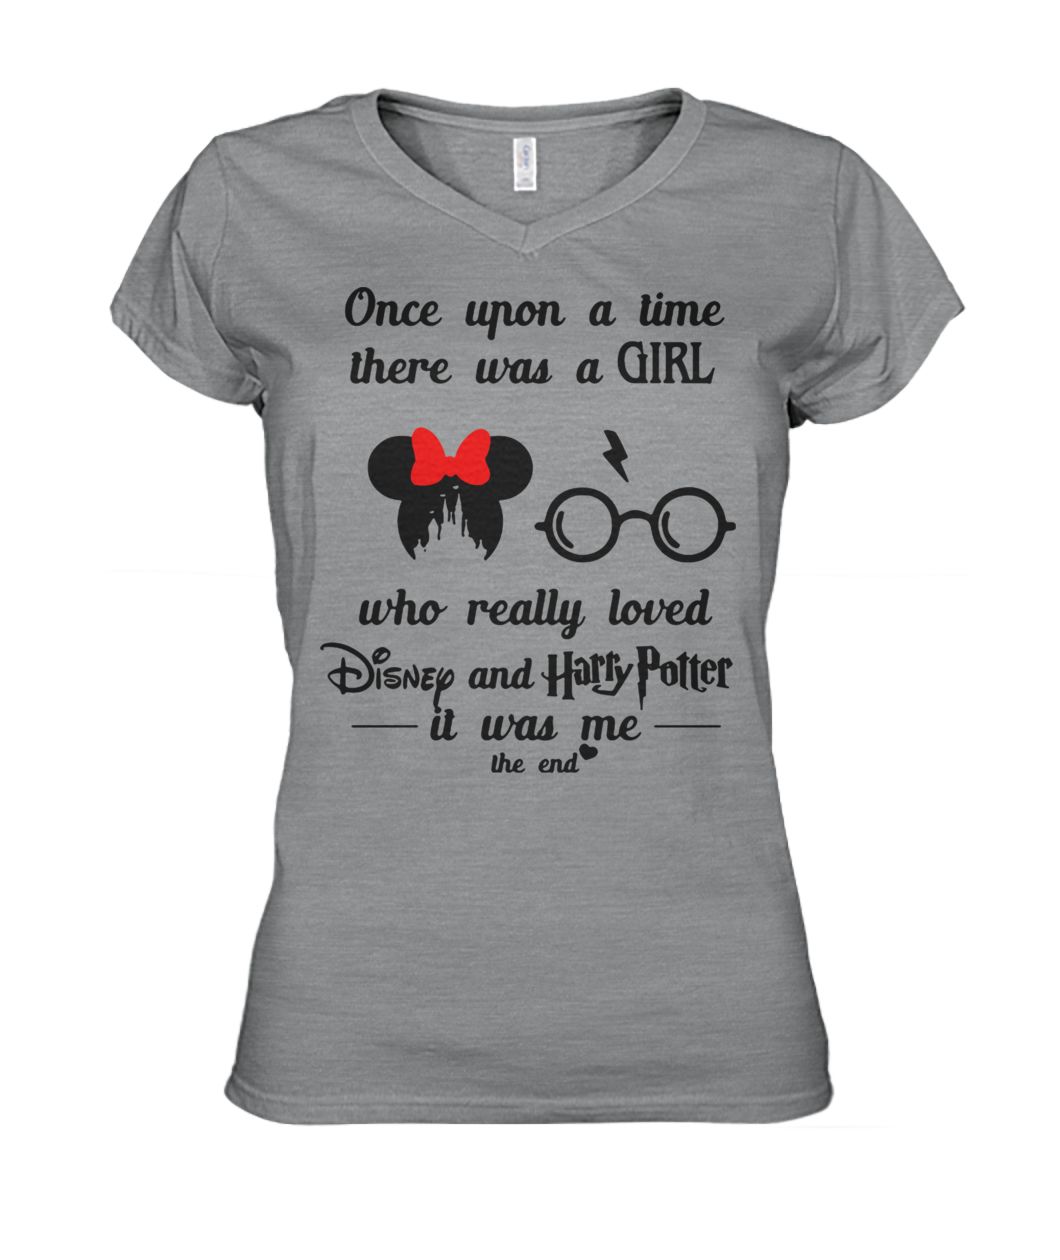 Once upon a time there was a girl who really loved disney and harry potter it was me the end women's v-neck